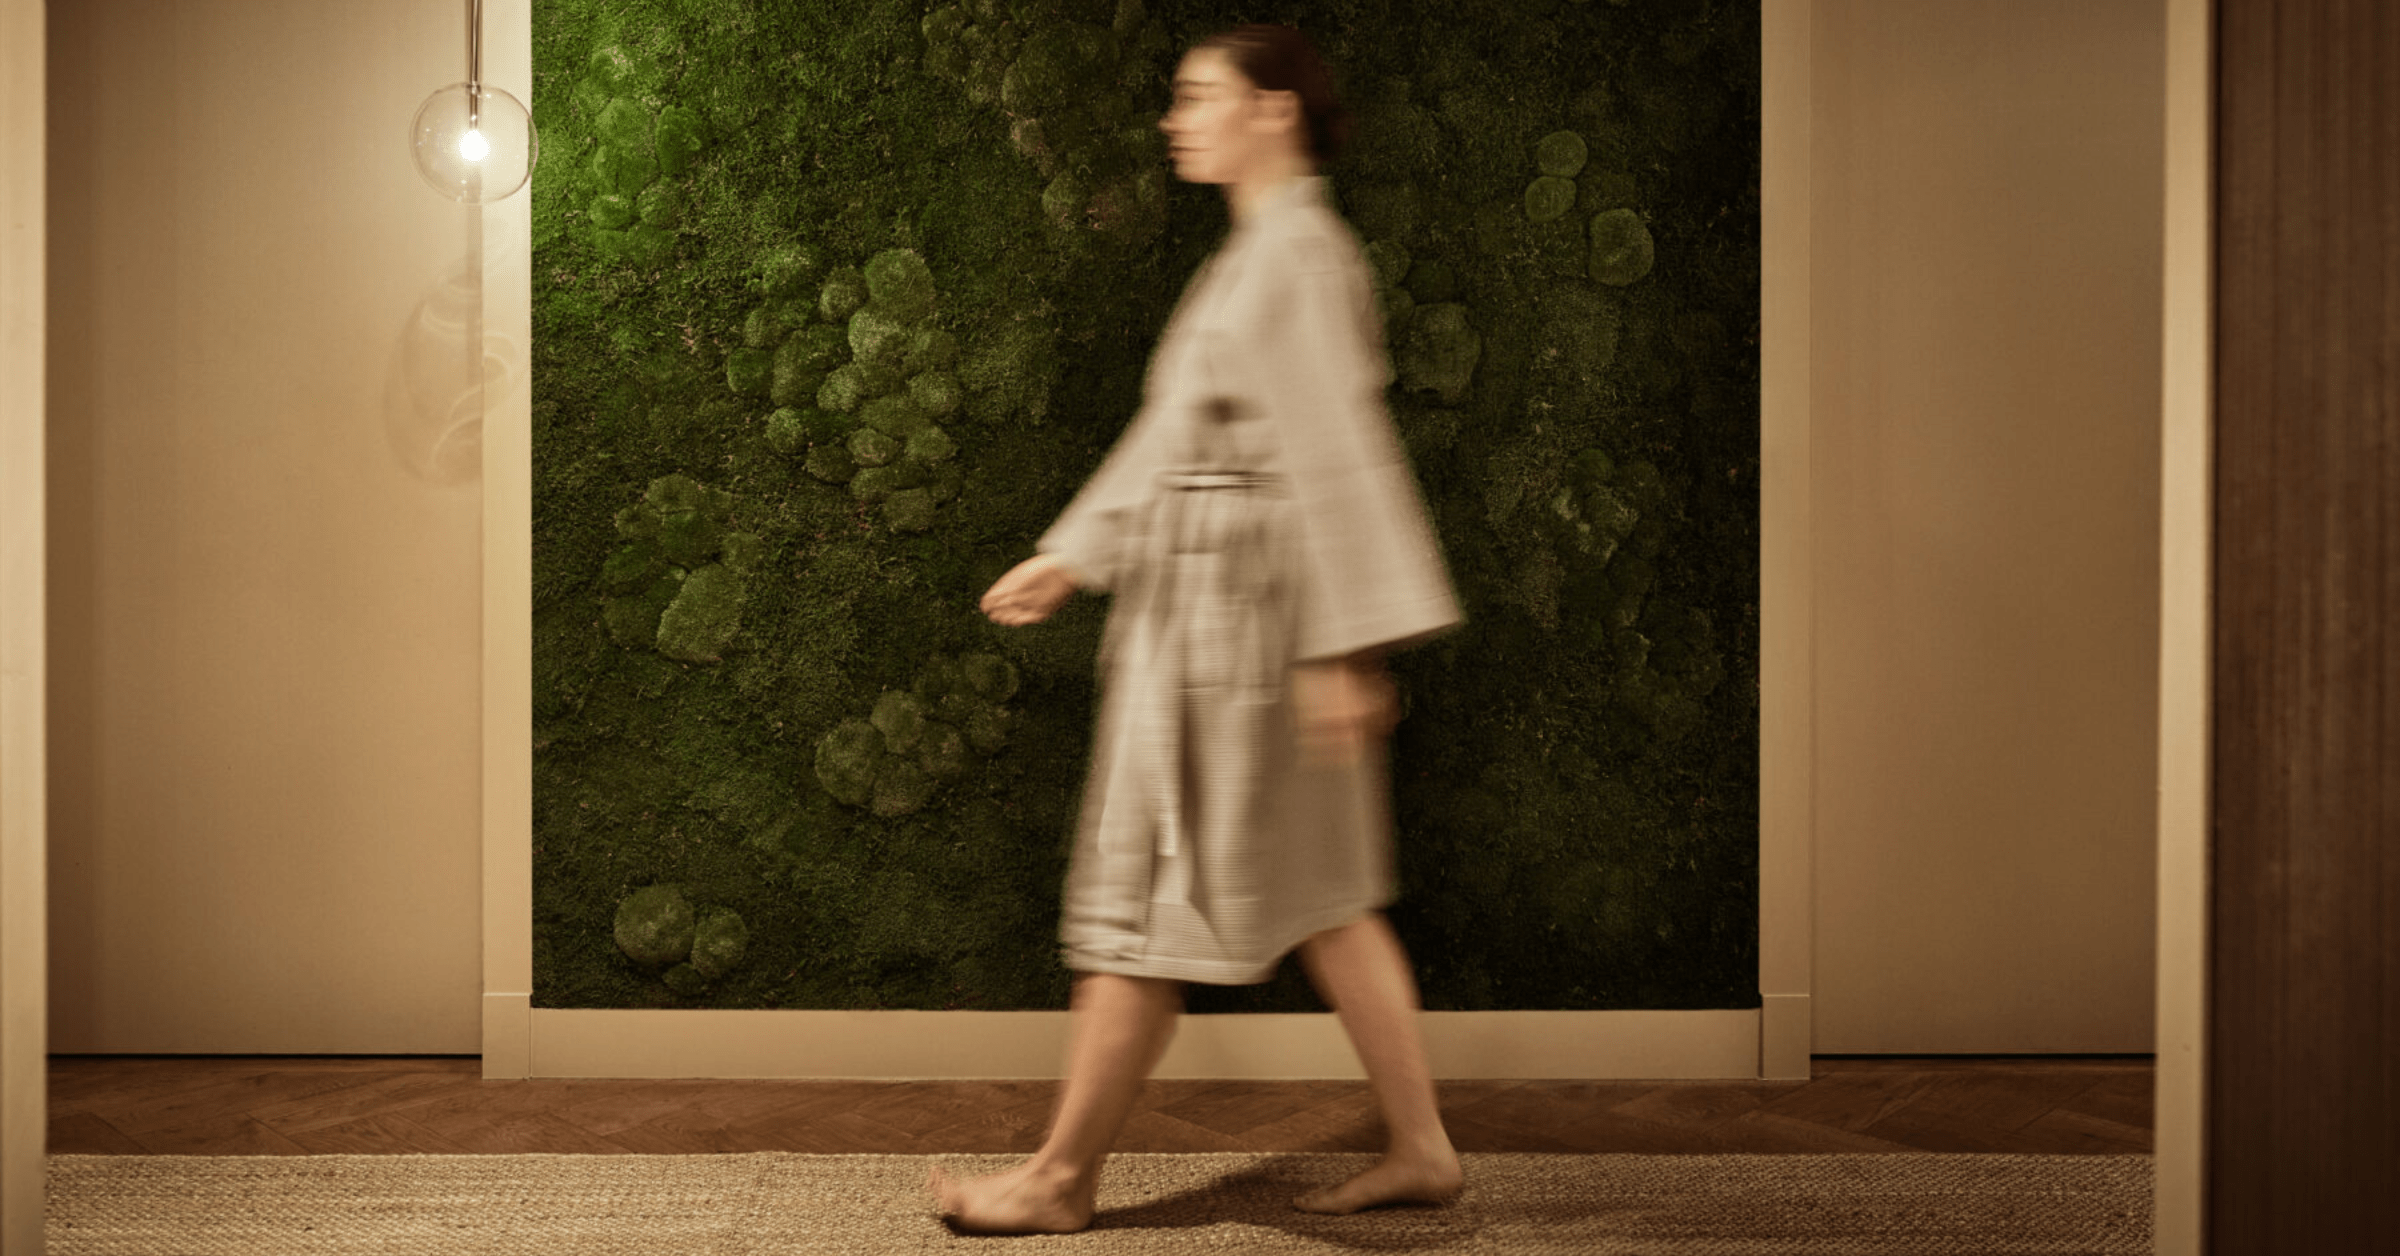 blythswood-square-hotel-spa-moss-wall-image